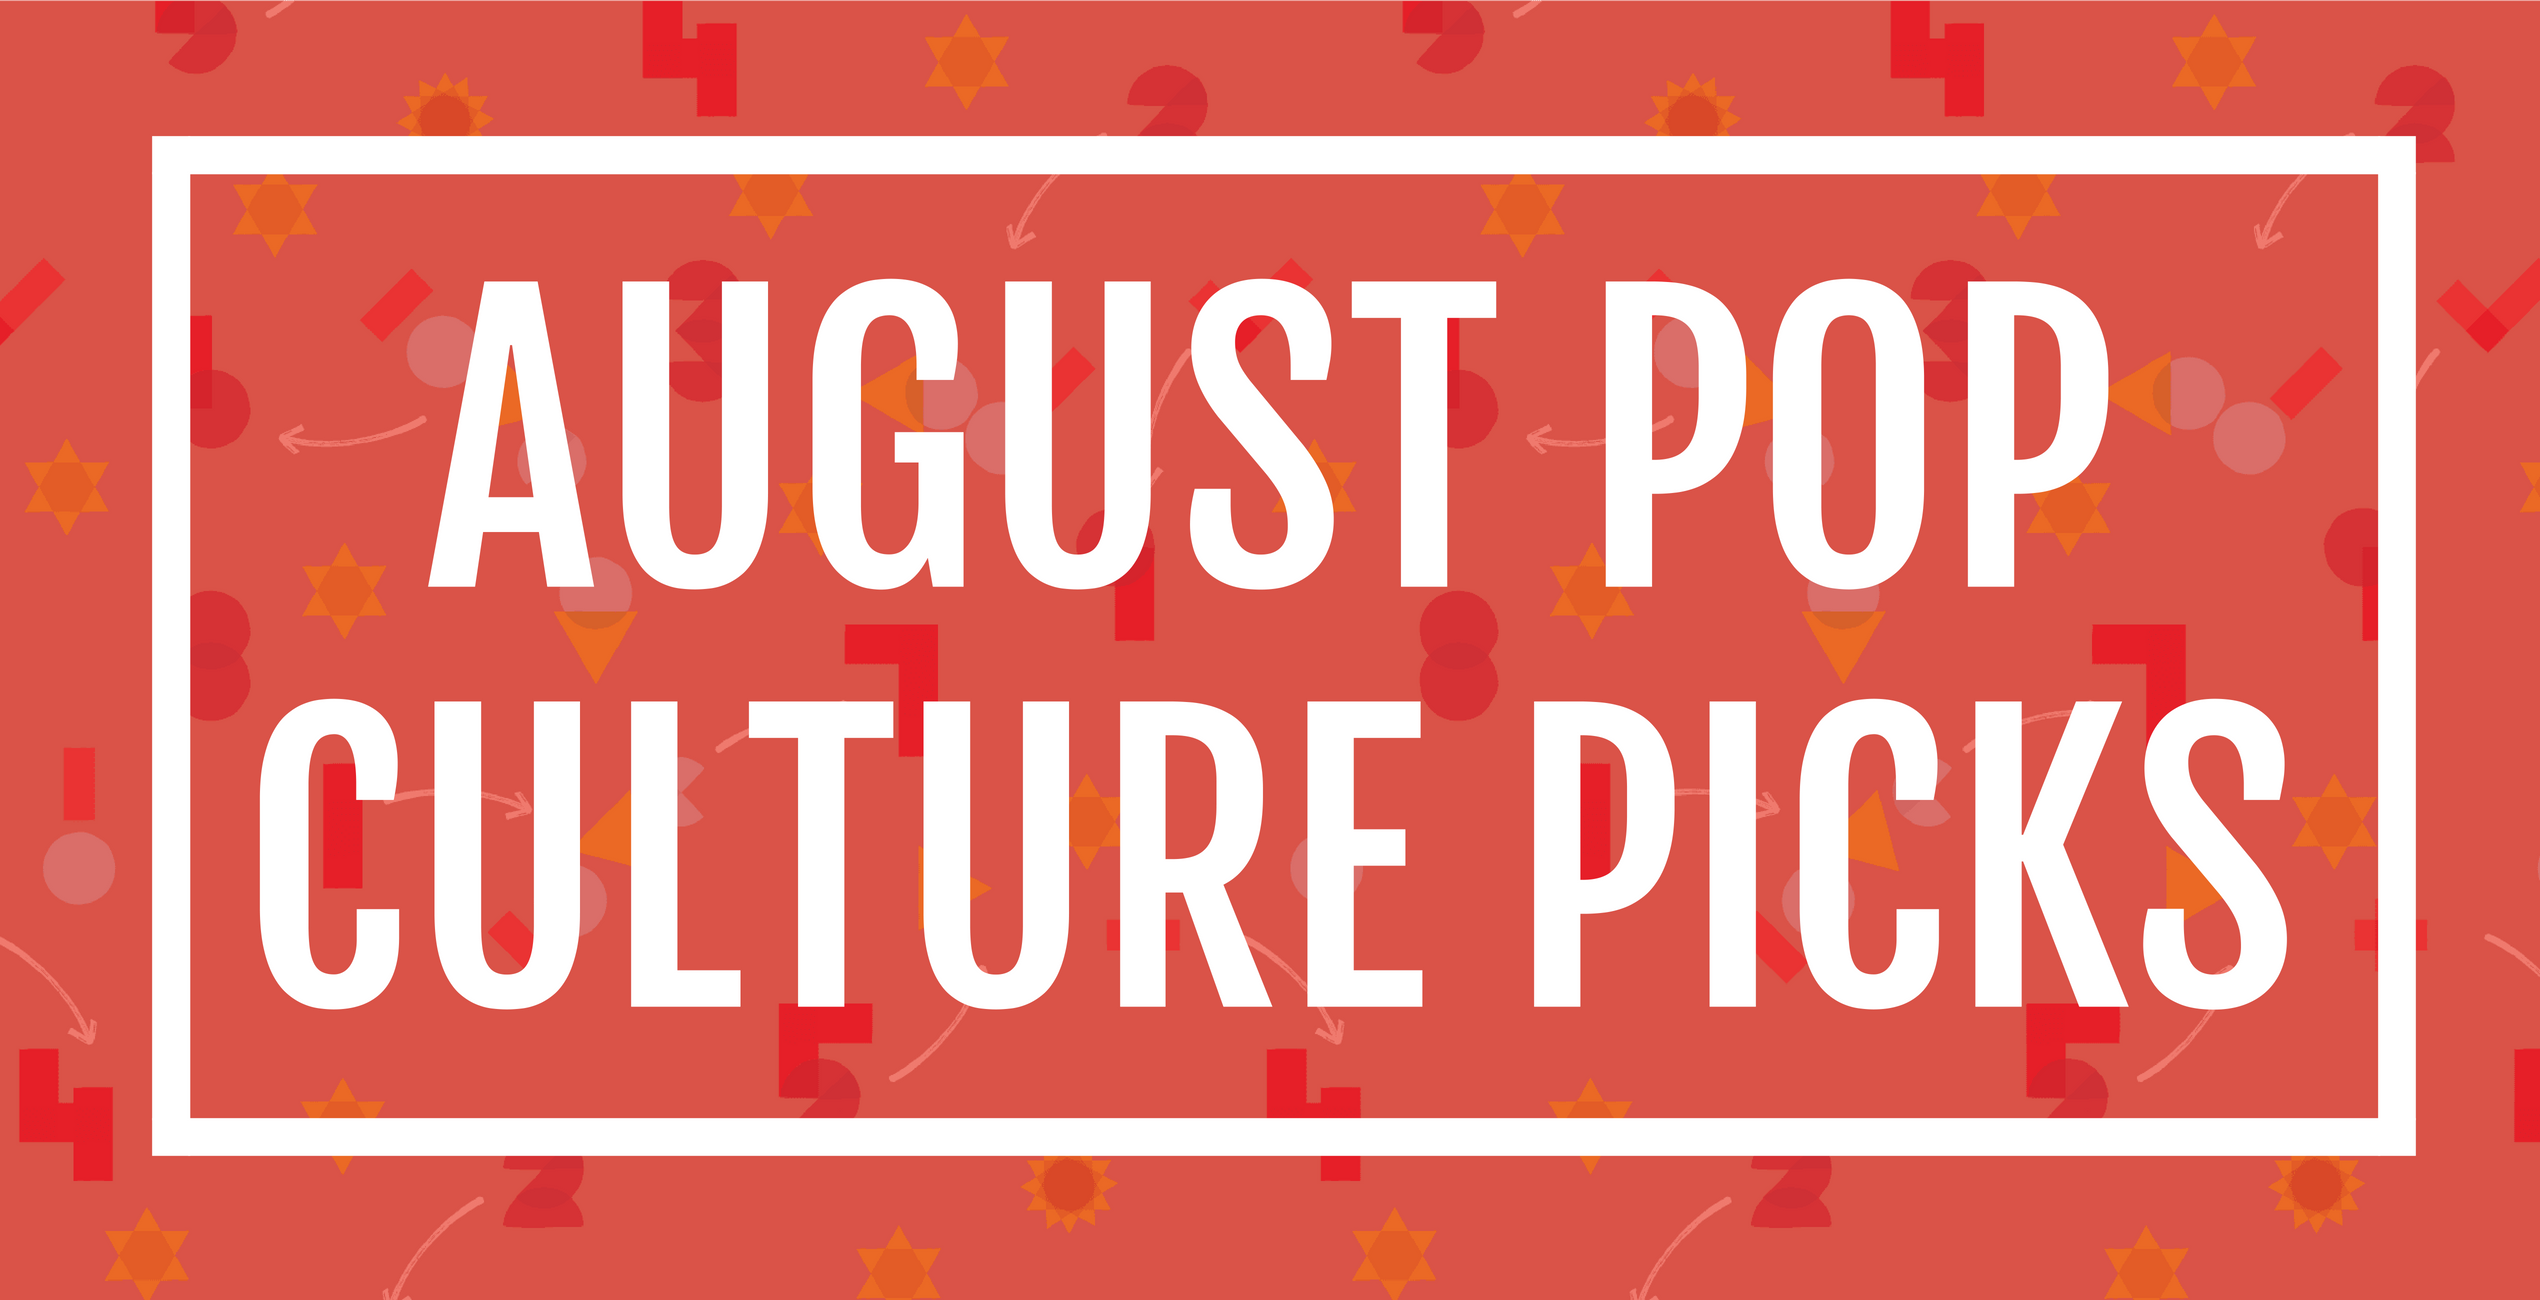 August Pop Culture Picks from the AE team (Appreciation Engine)